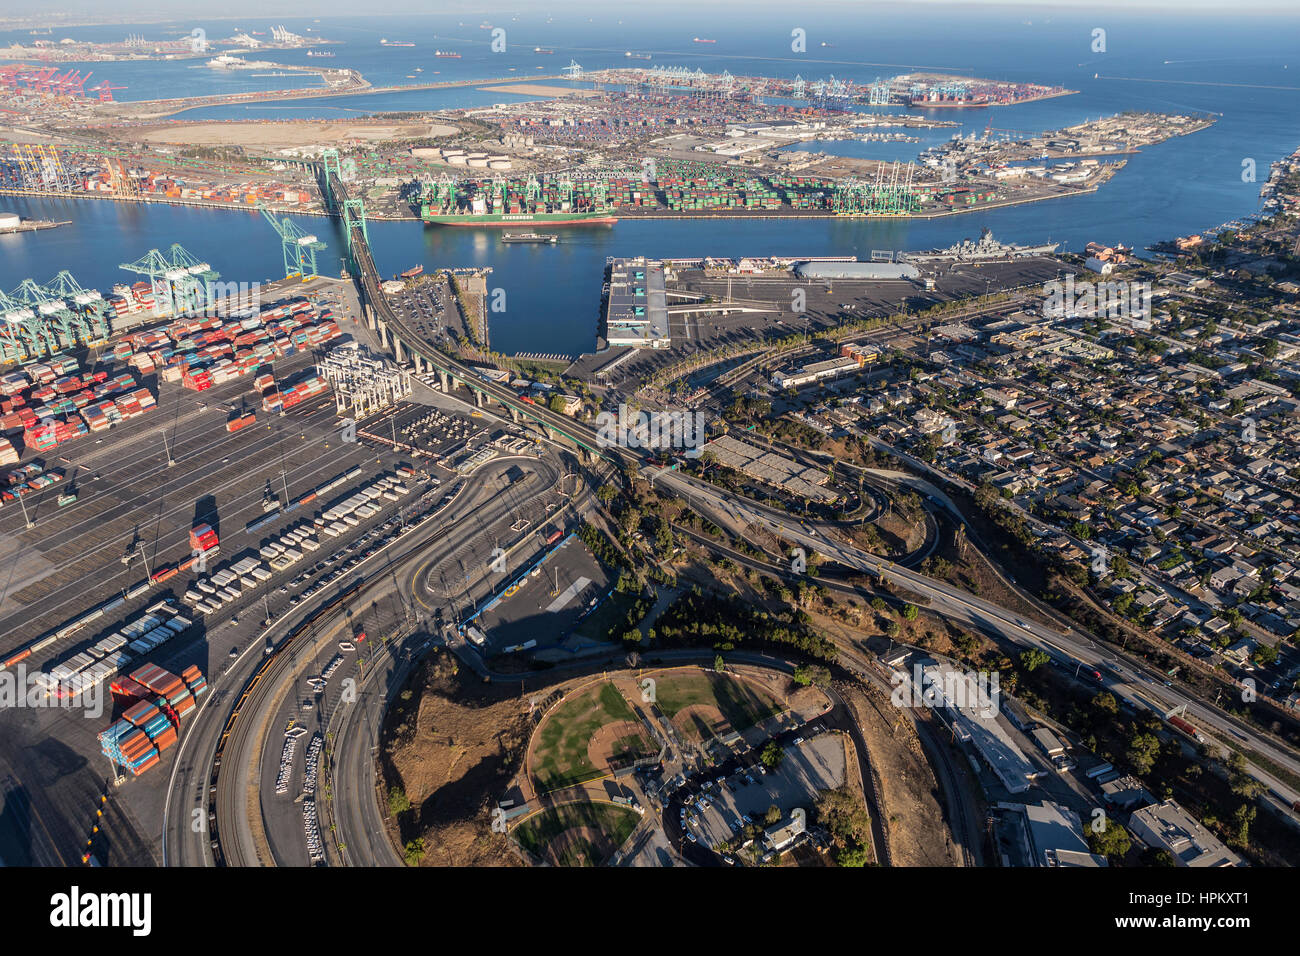 Los Angeles, California, USA - August 16, 2016:  Afternoon aerial view of the Port of Los Angeles, Vincent Thomas Bridge and the community of San Pedr Stock Photo